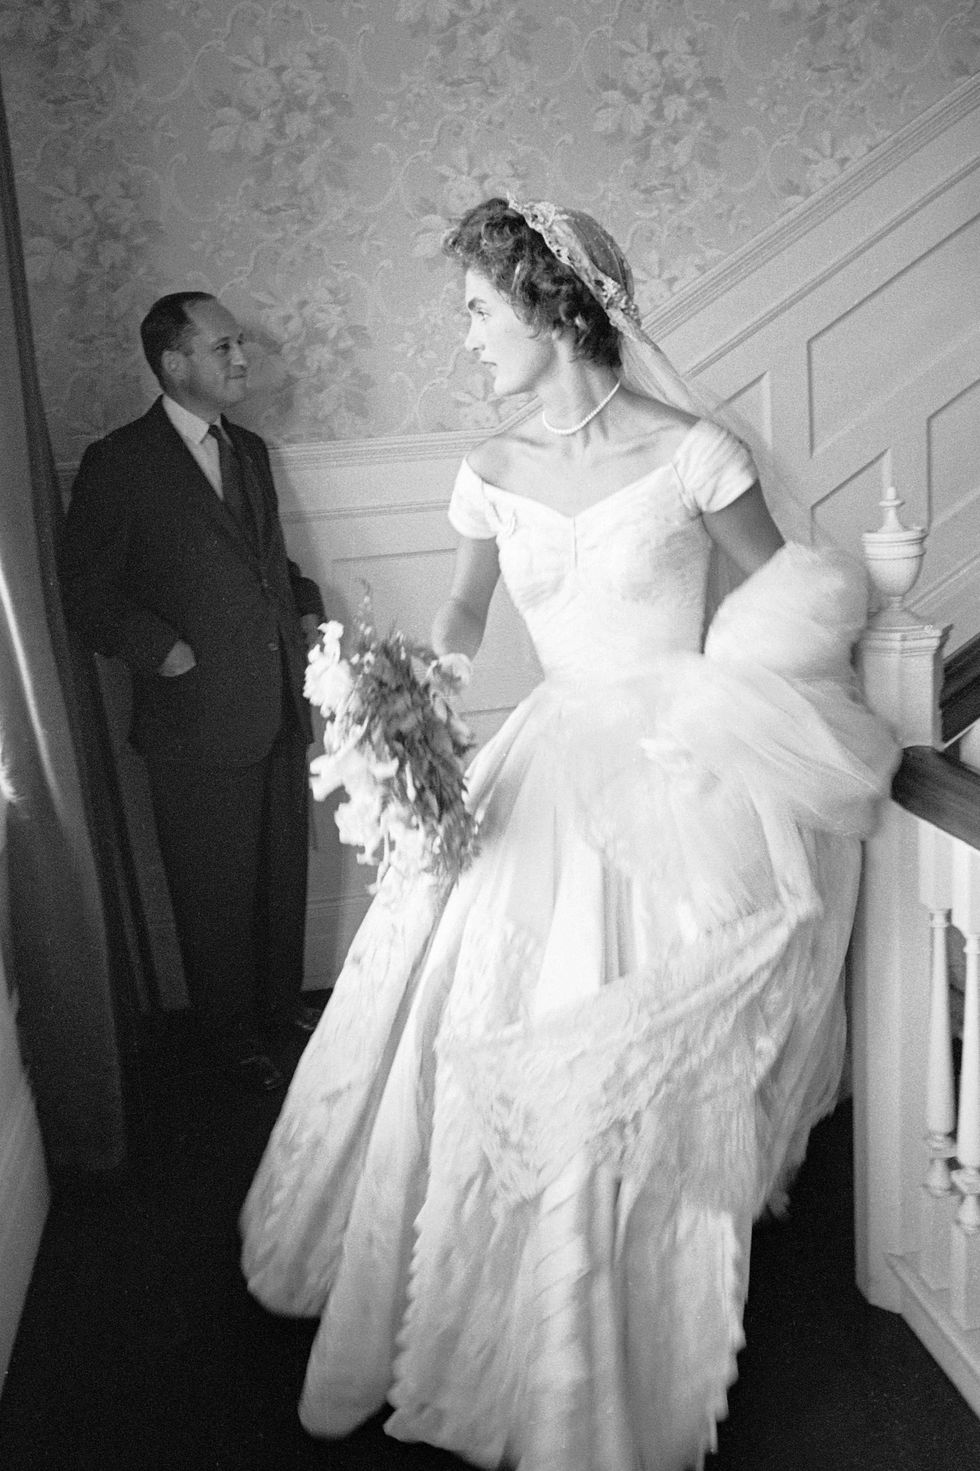 socialite jacqueline bouvier in wedding dress on landing in home on day of her marriage to sen john kennedy  photo by lisa larsenthe life picture collection via getty images